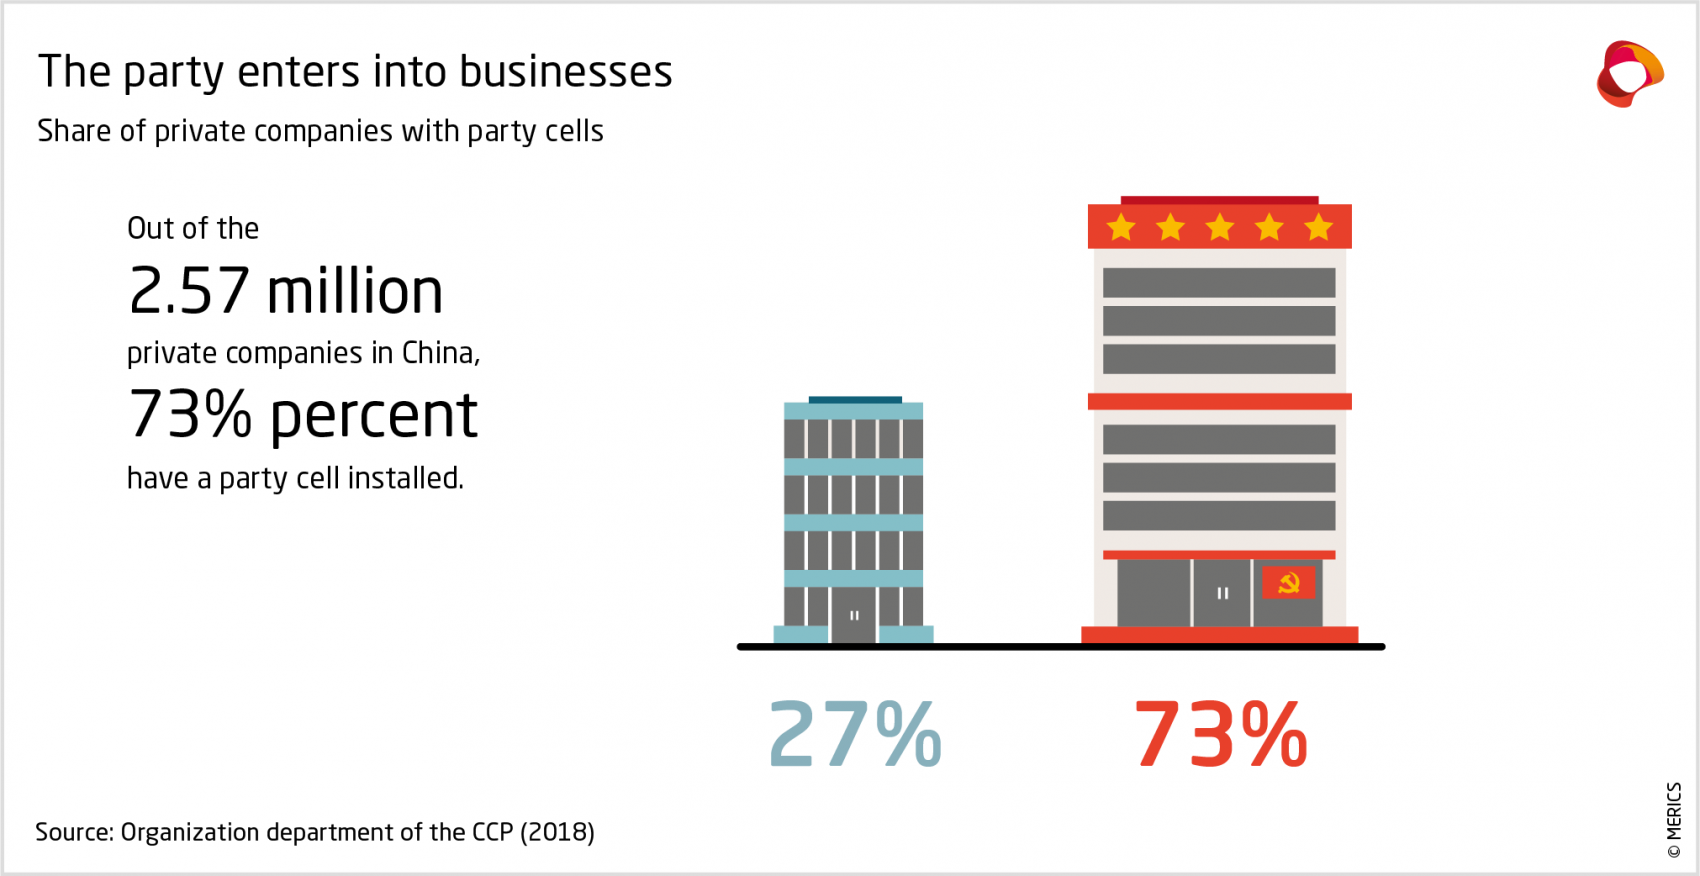 Share of private companies with party cells